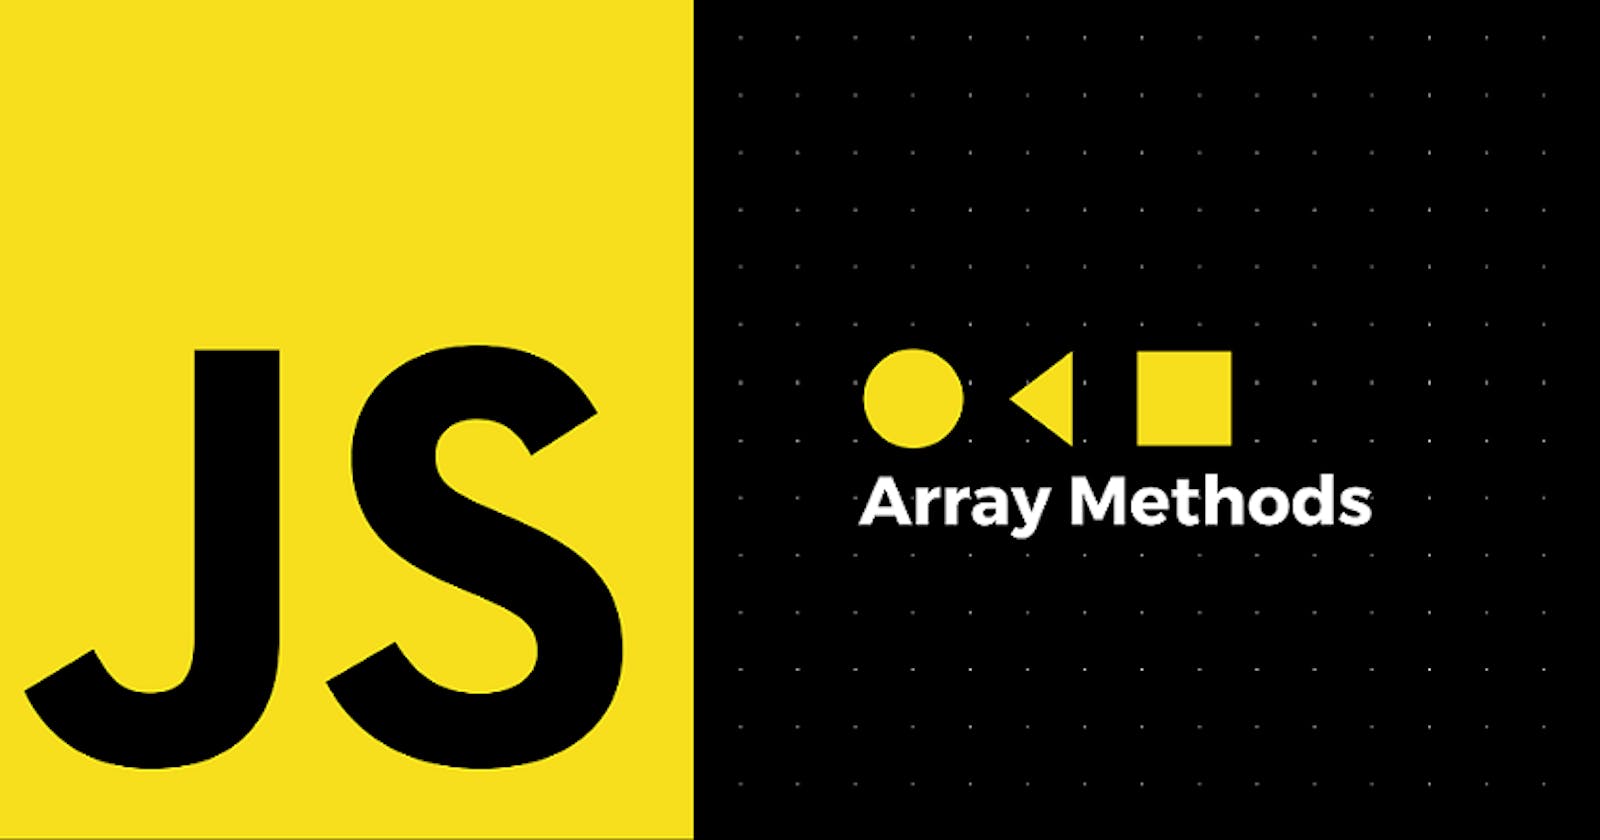 Array methods Every JS developer must know.